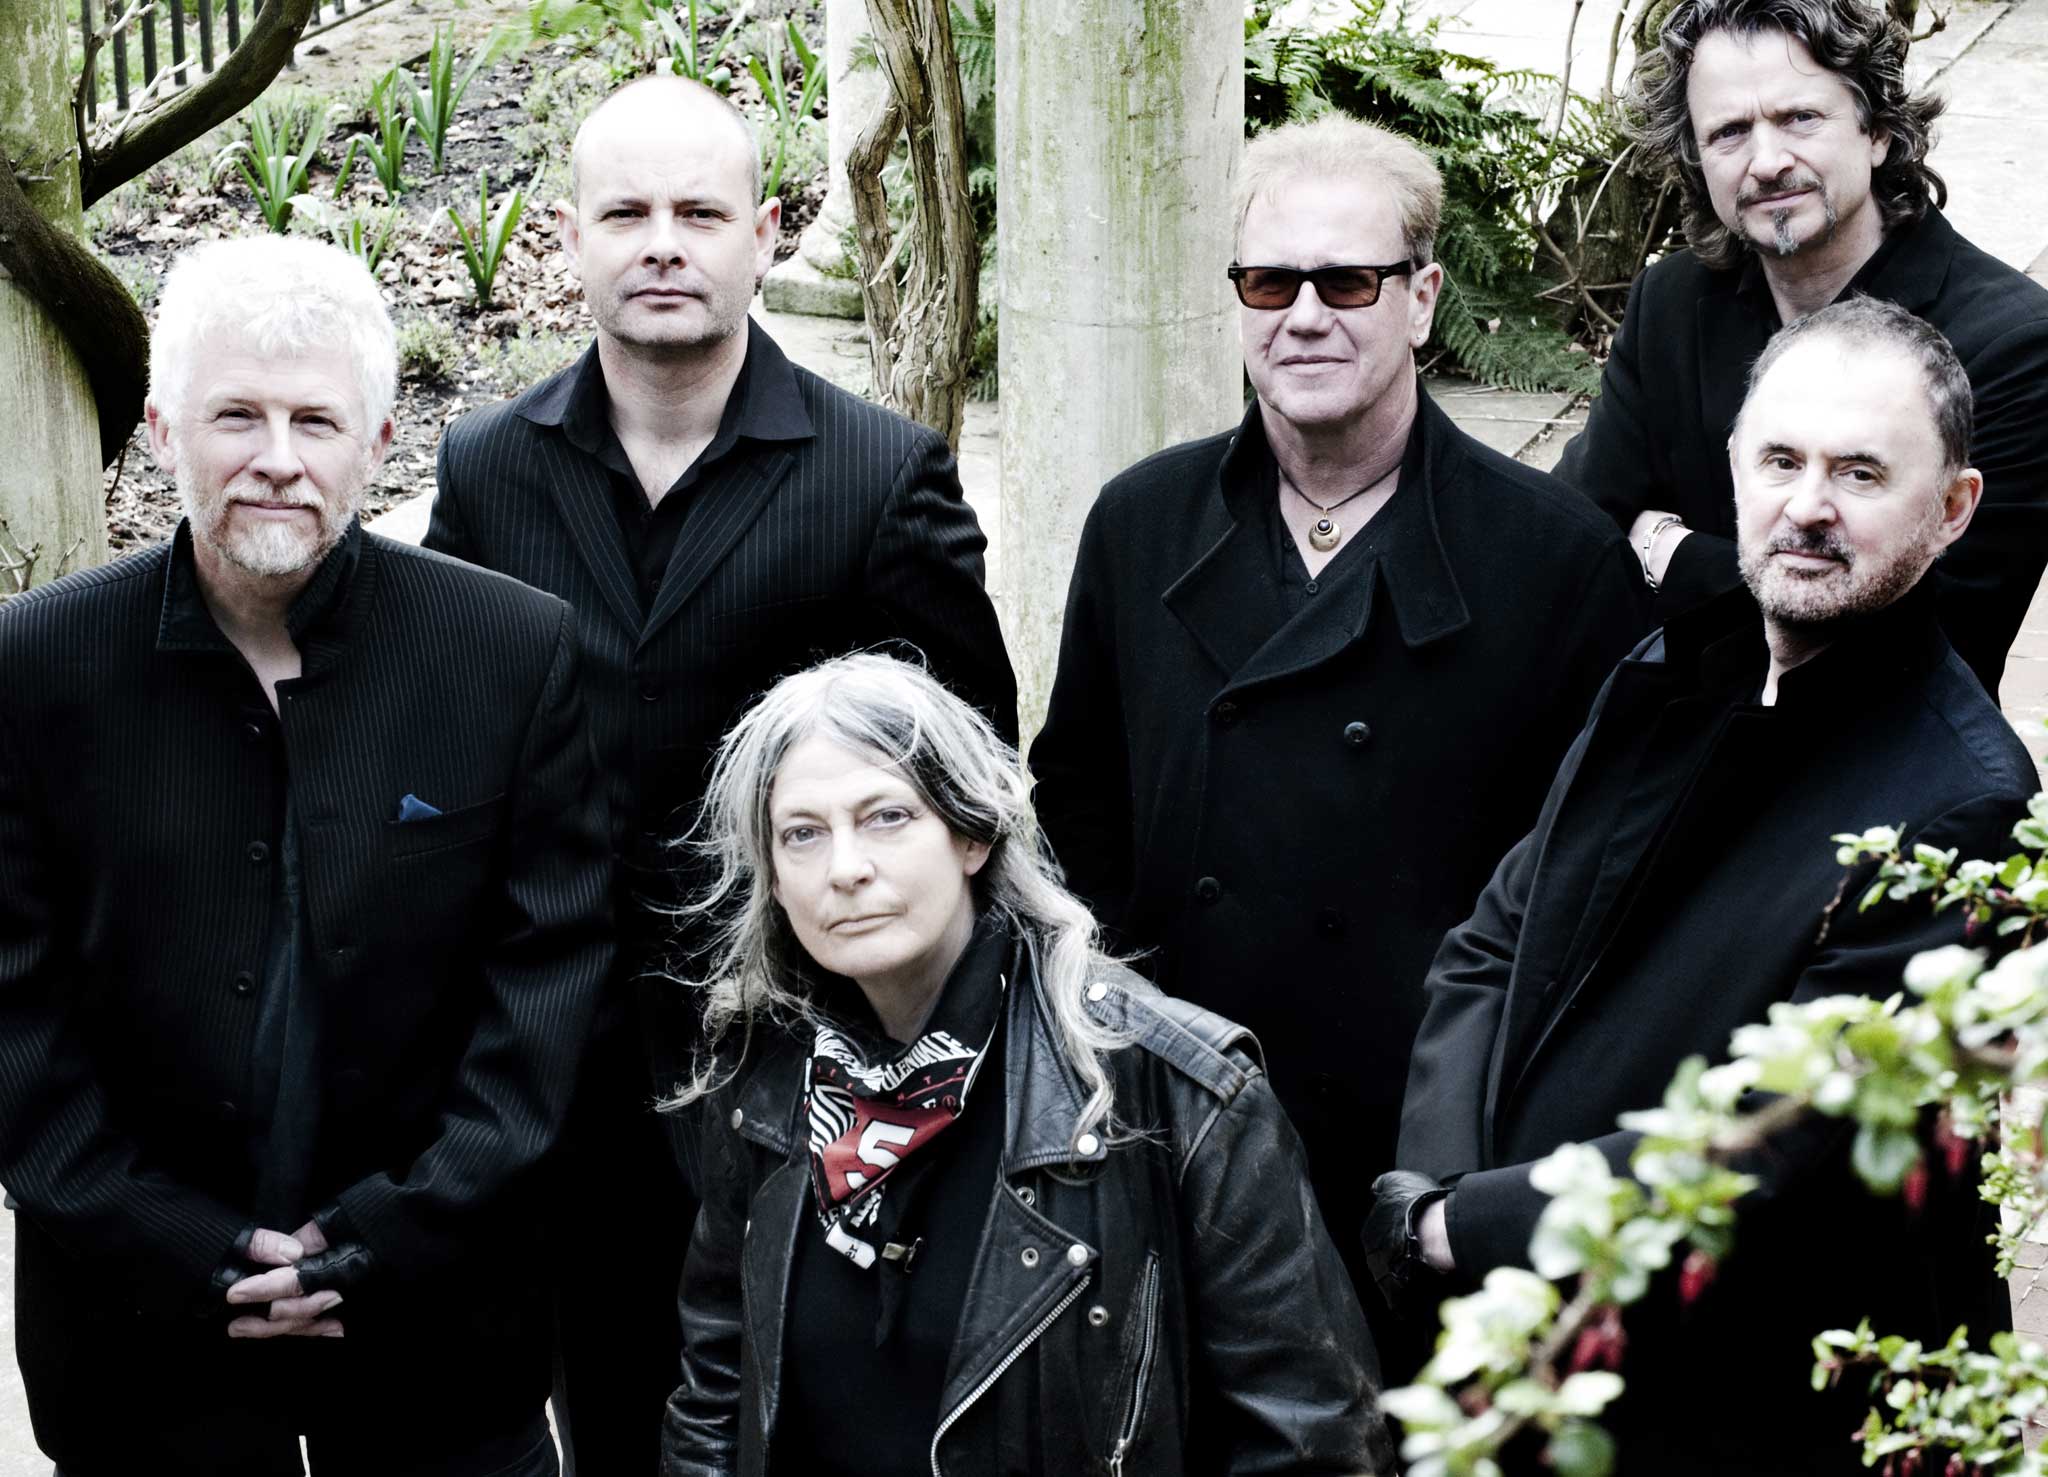 June Tabor and Oysterband will be touring their magnificent Ragged Kingdom album